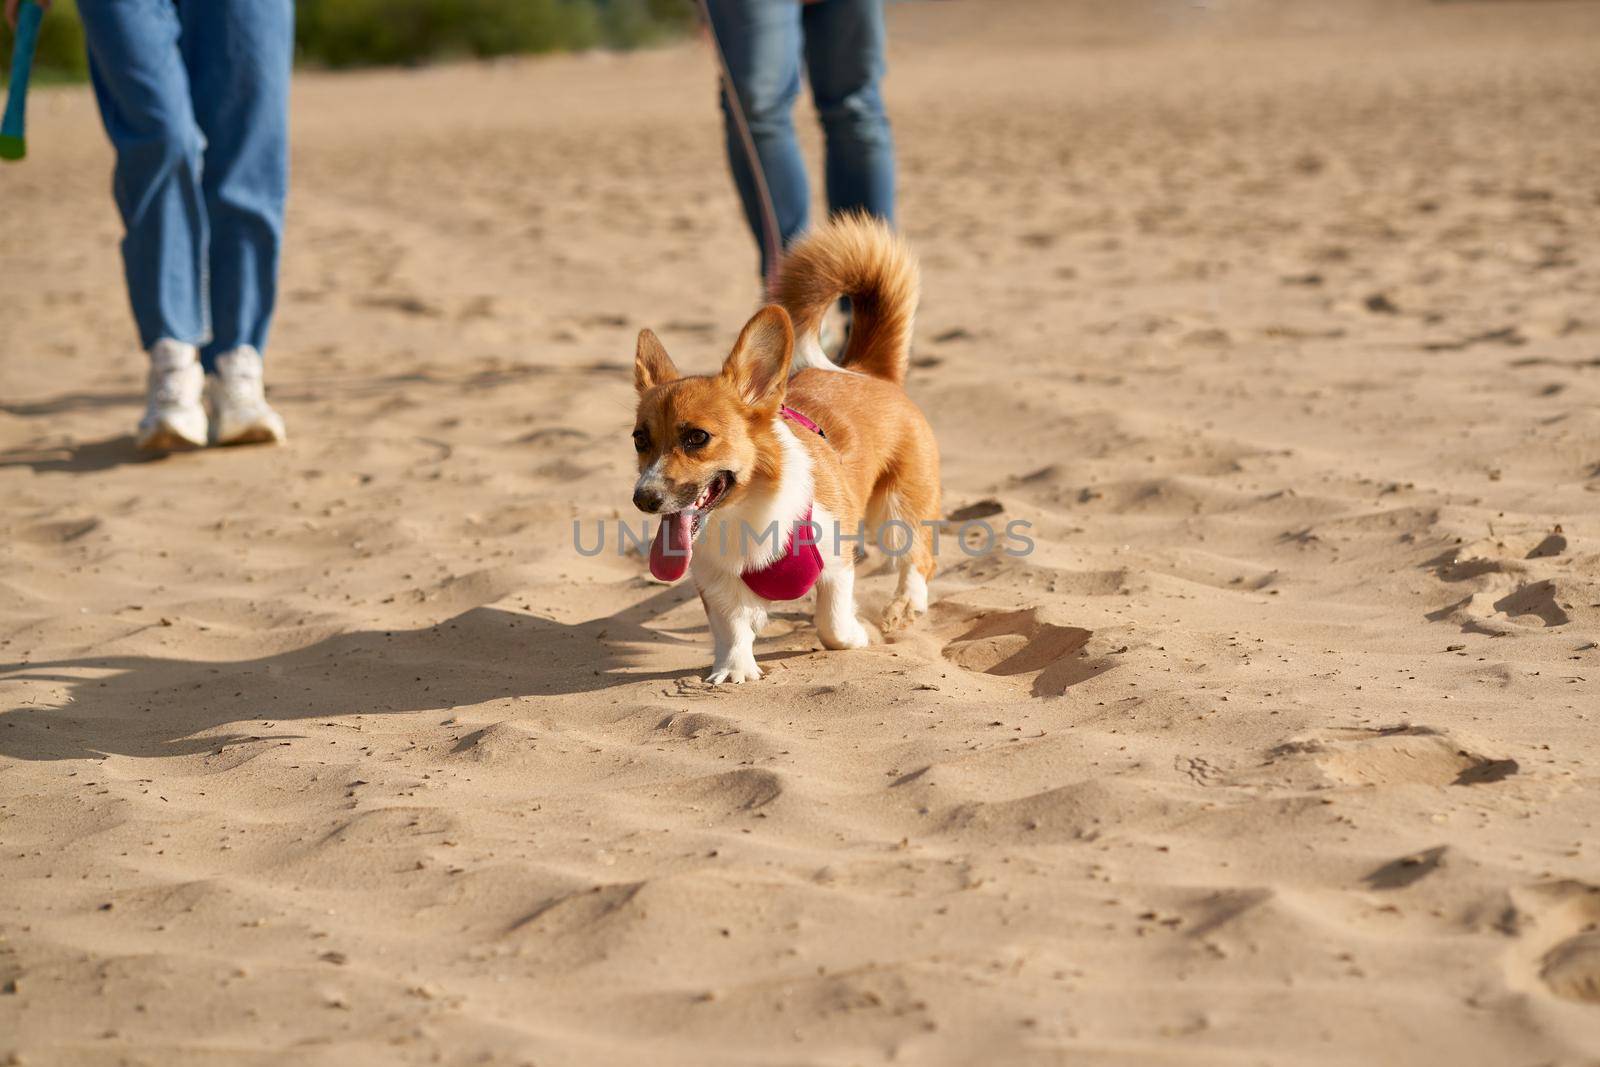 Cropped image of people walking in beach with dog. Foots of woman and man going on sand road outdoors with corgi puppy. Focus on pet, human legs on background